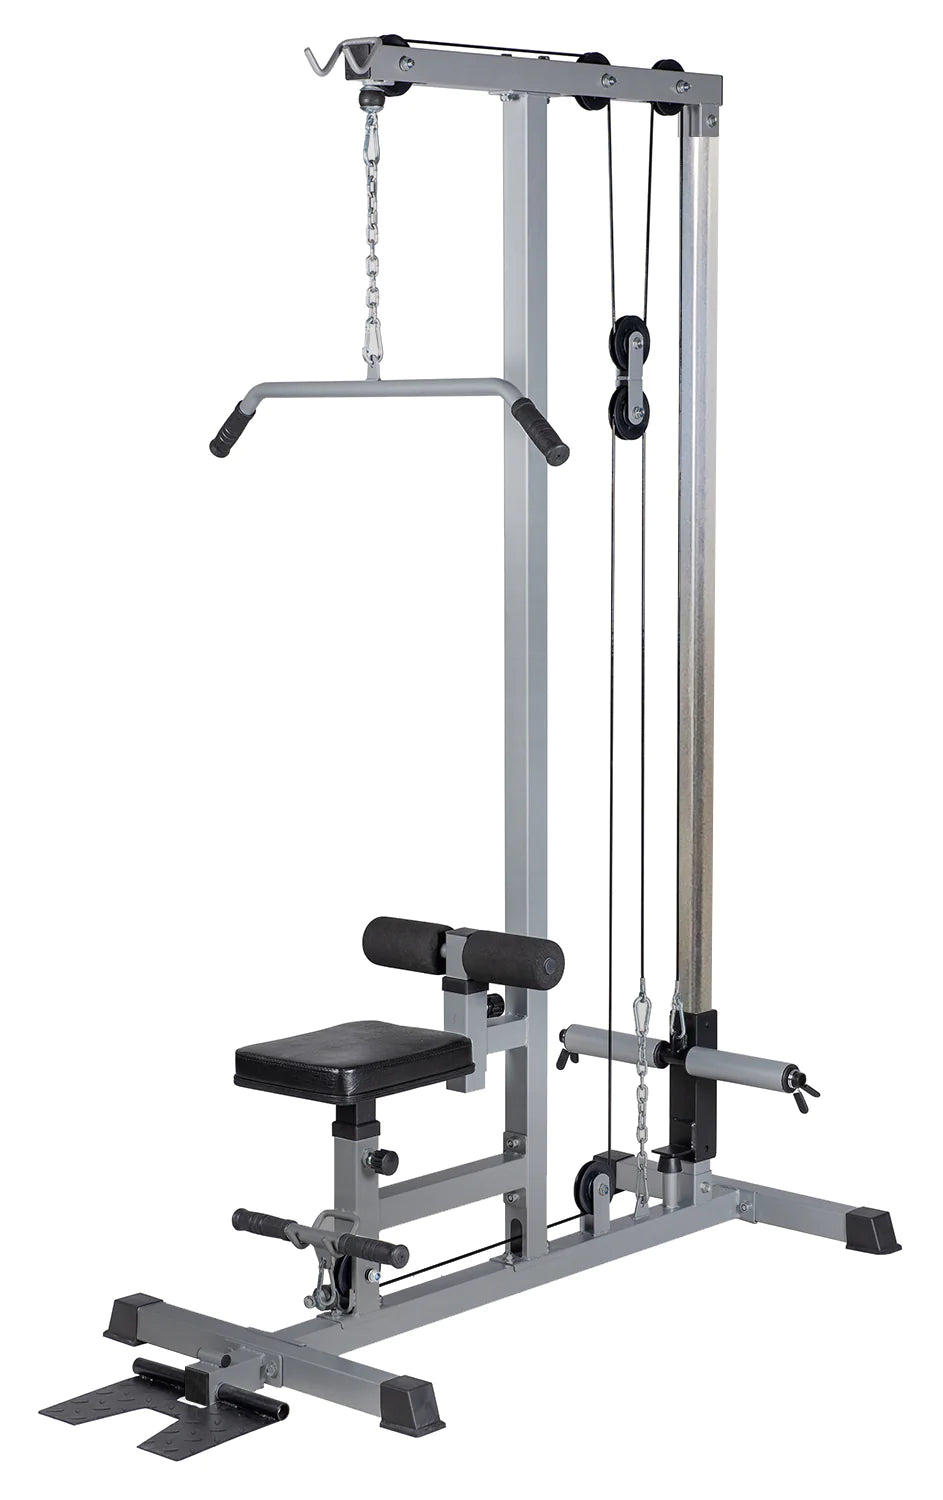 Ultimate Lat Pull Down Machine: Enhance Your Fitness Routine with Pulldown and Low Row Bar Exercises